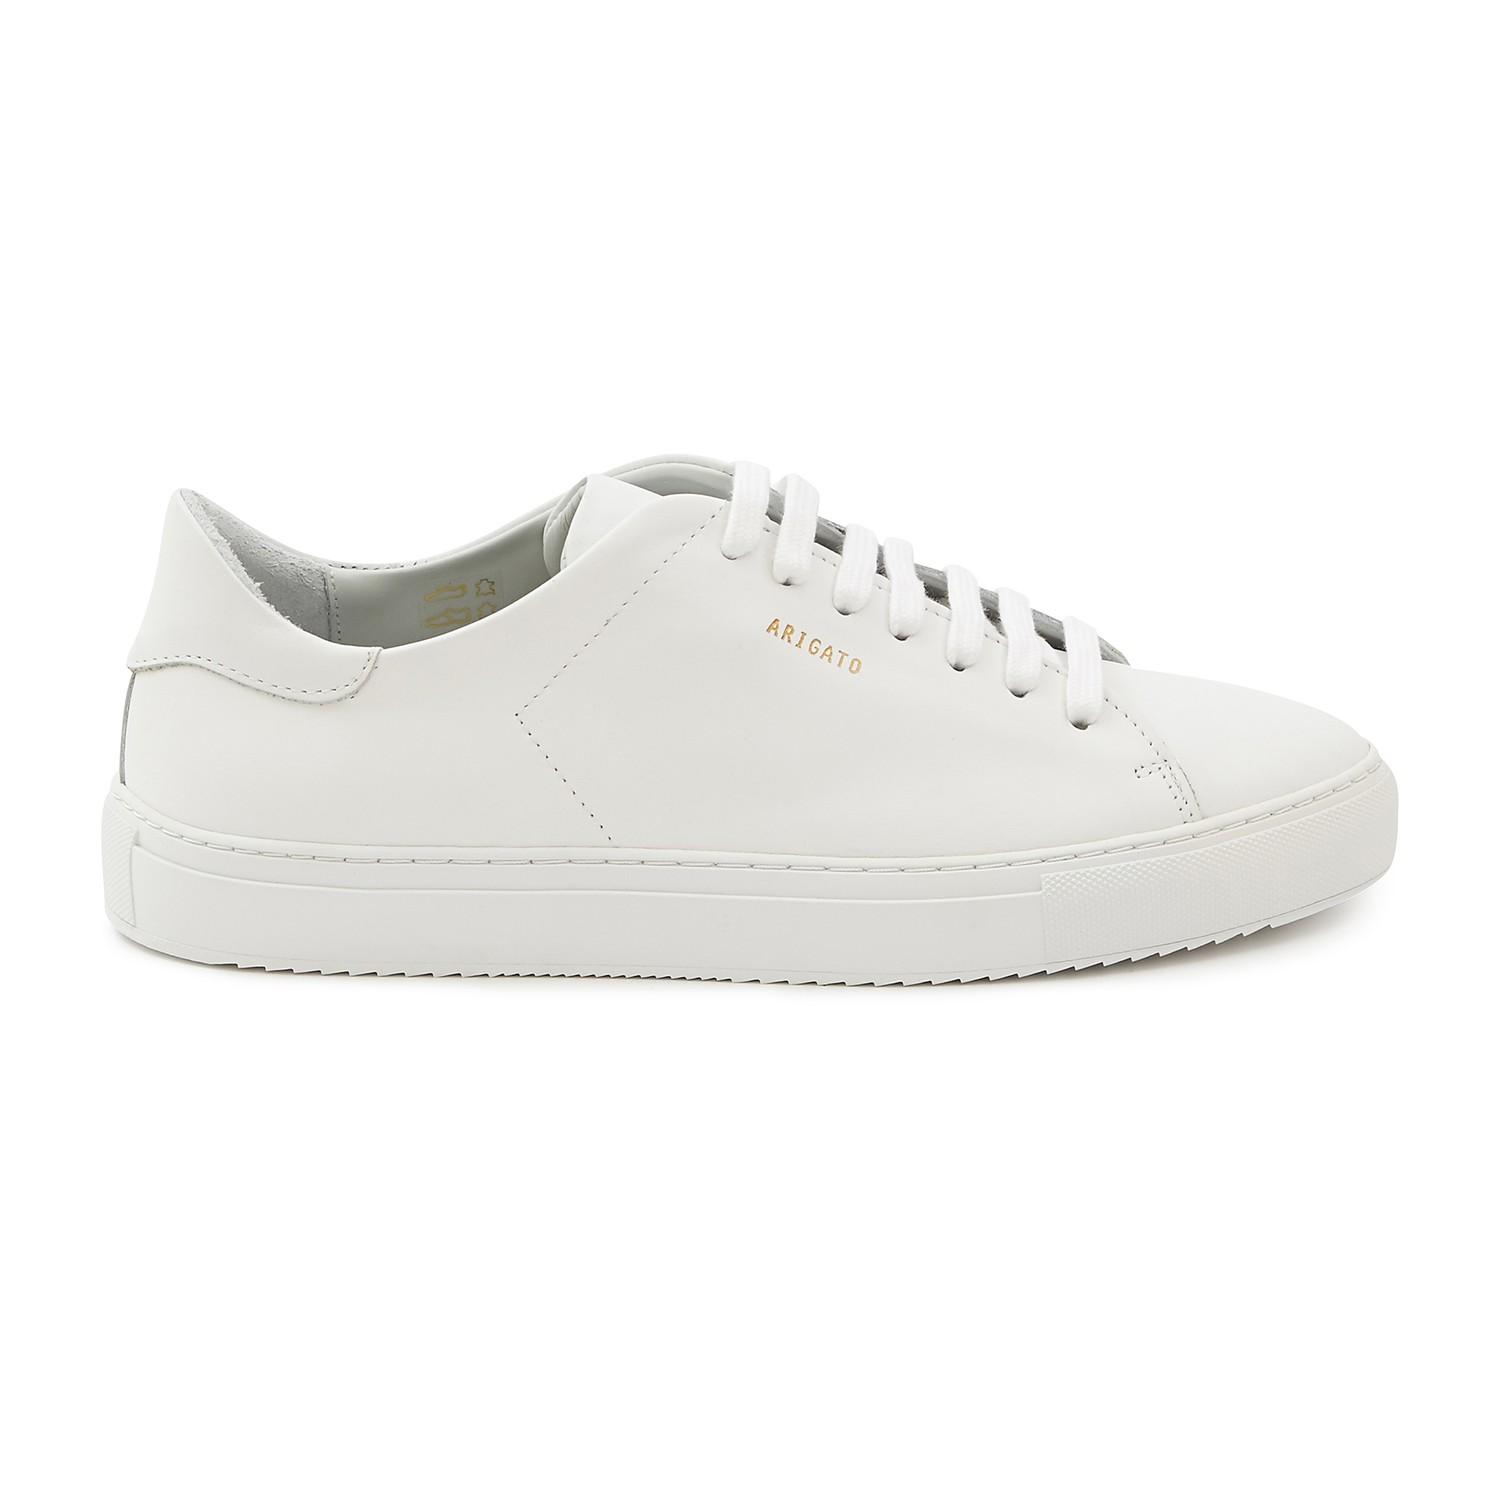 Axel Arigato Clean 90 Trainers in White for Men - Lyst